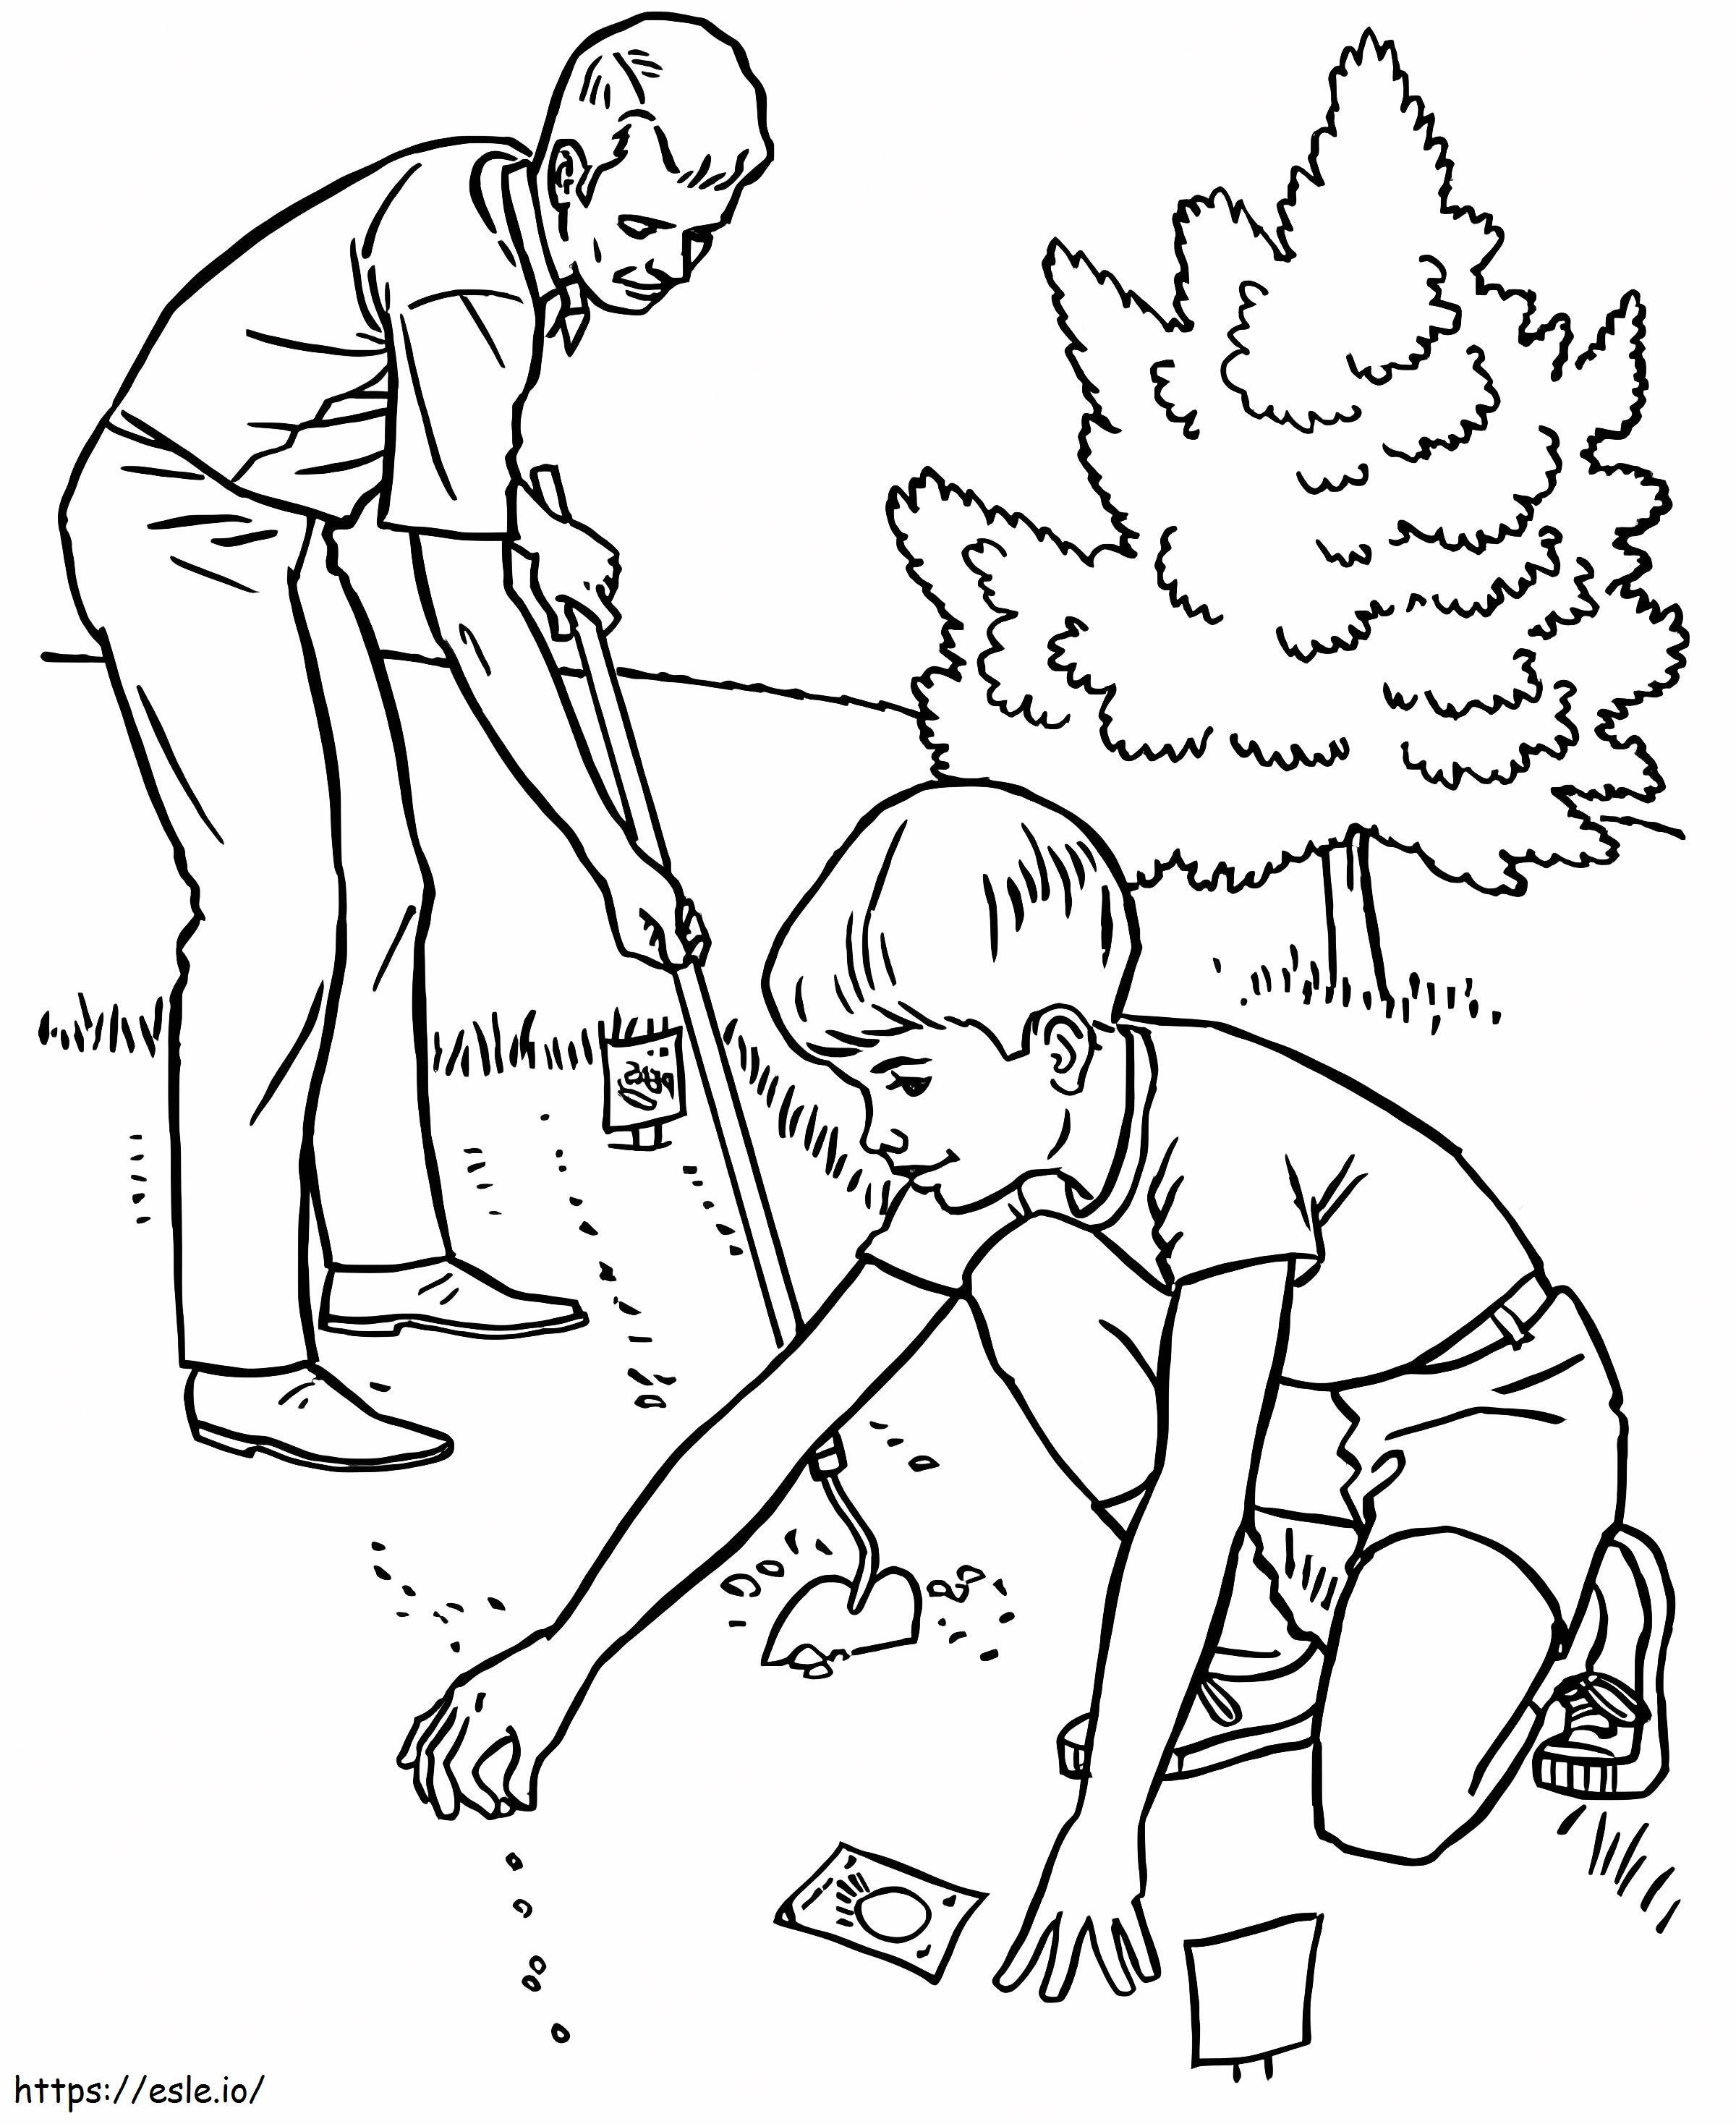 Father And Son Planting Seeds In The Garden coloring page